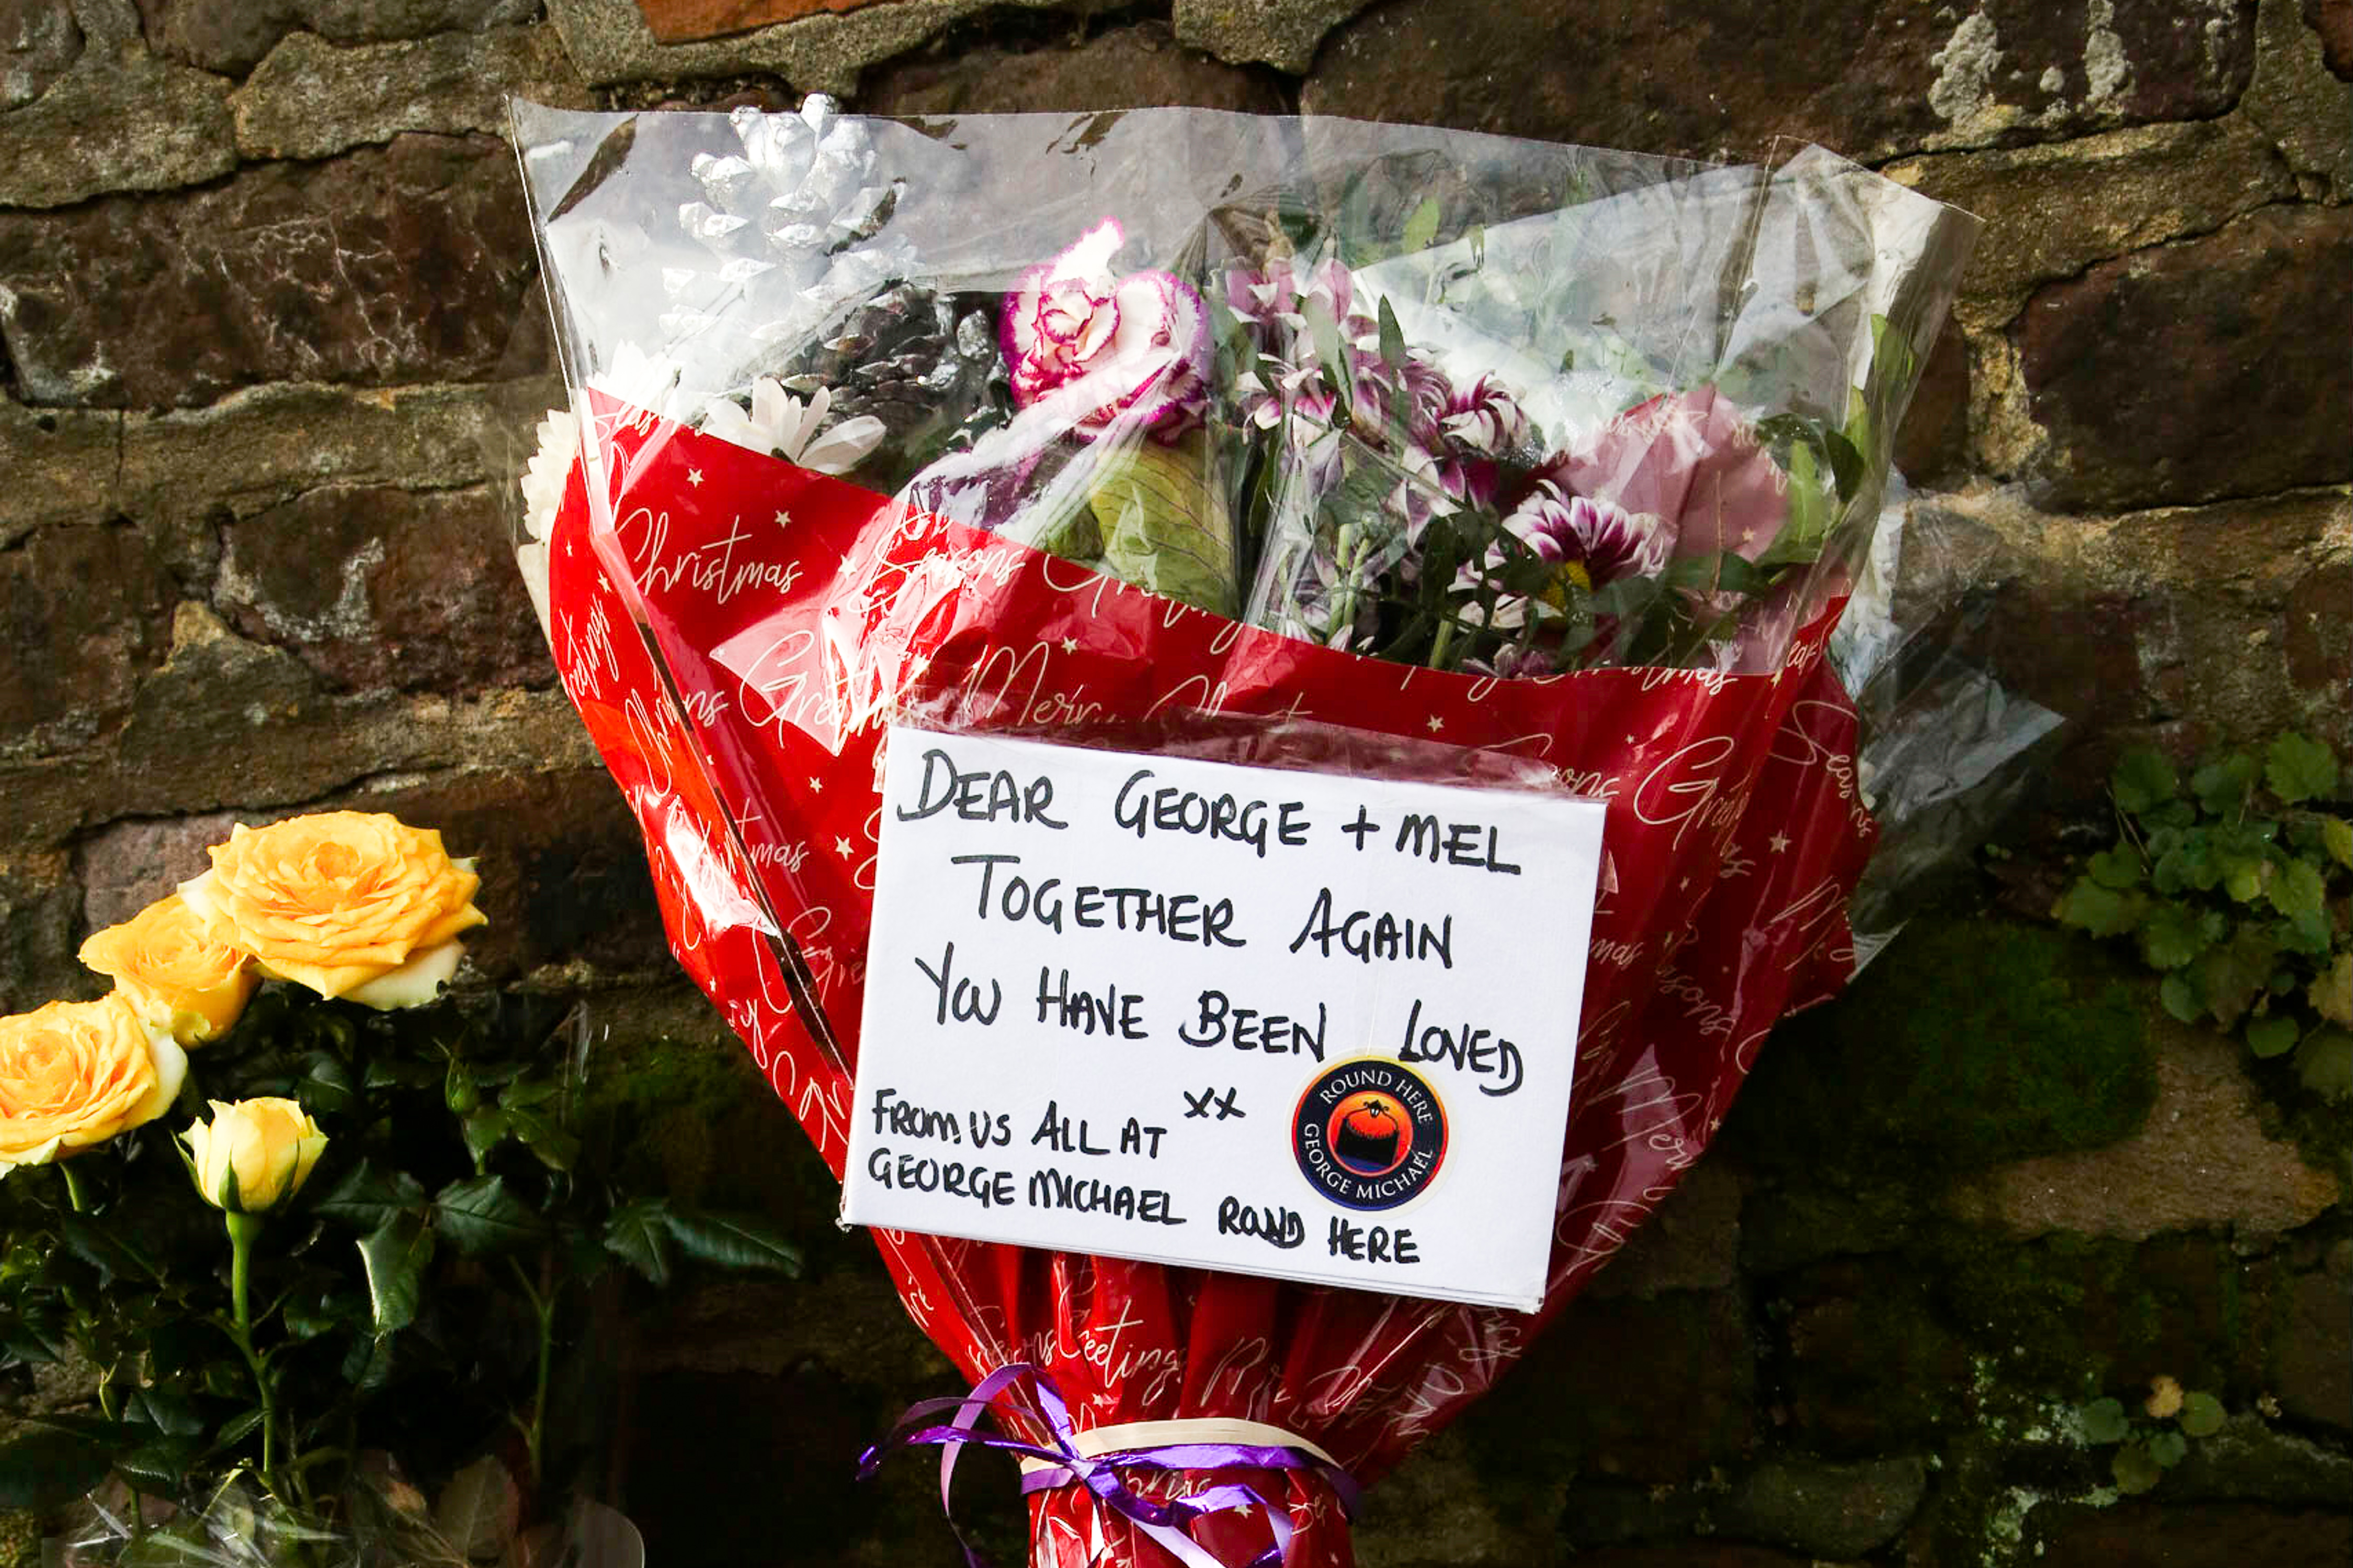 Tributes in memory of Melanie Panayiotou outside George Michael's former house on December 29, 2019 in Highgate, north London, England | Source: Getty Images